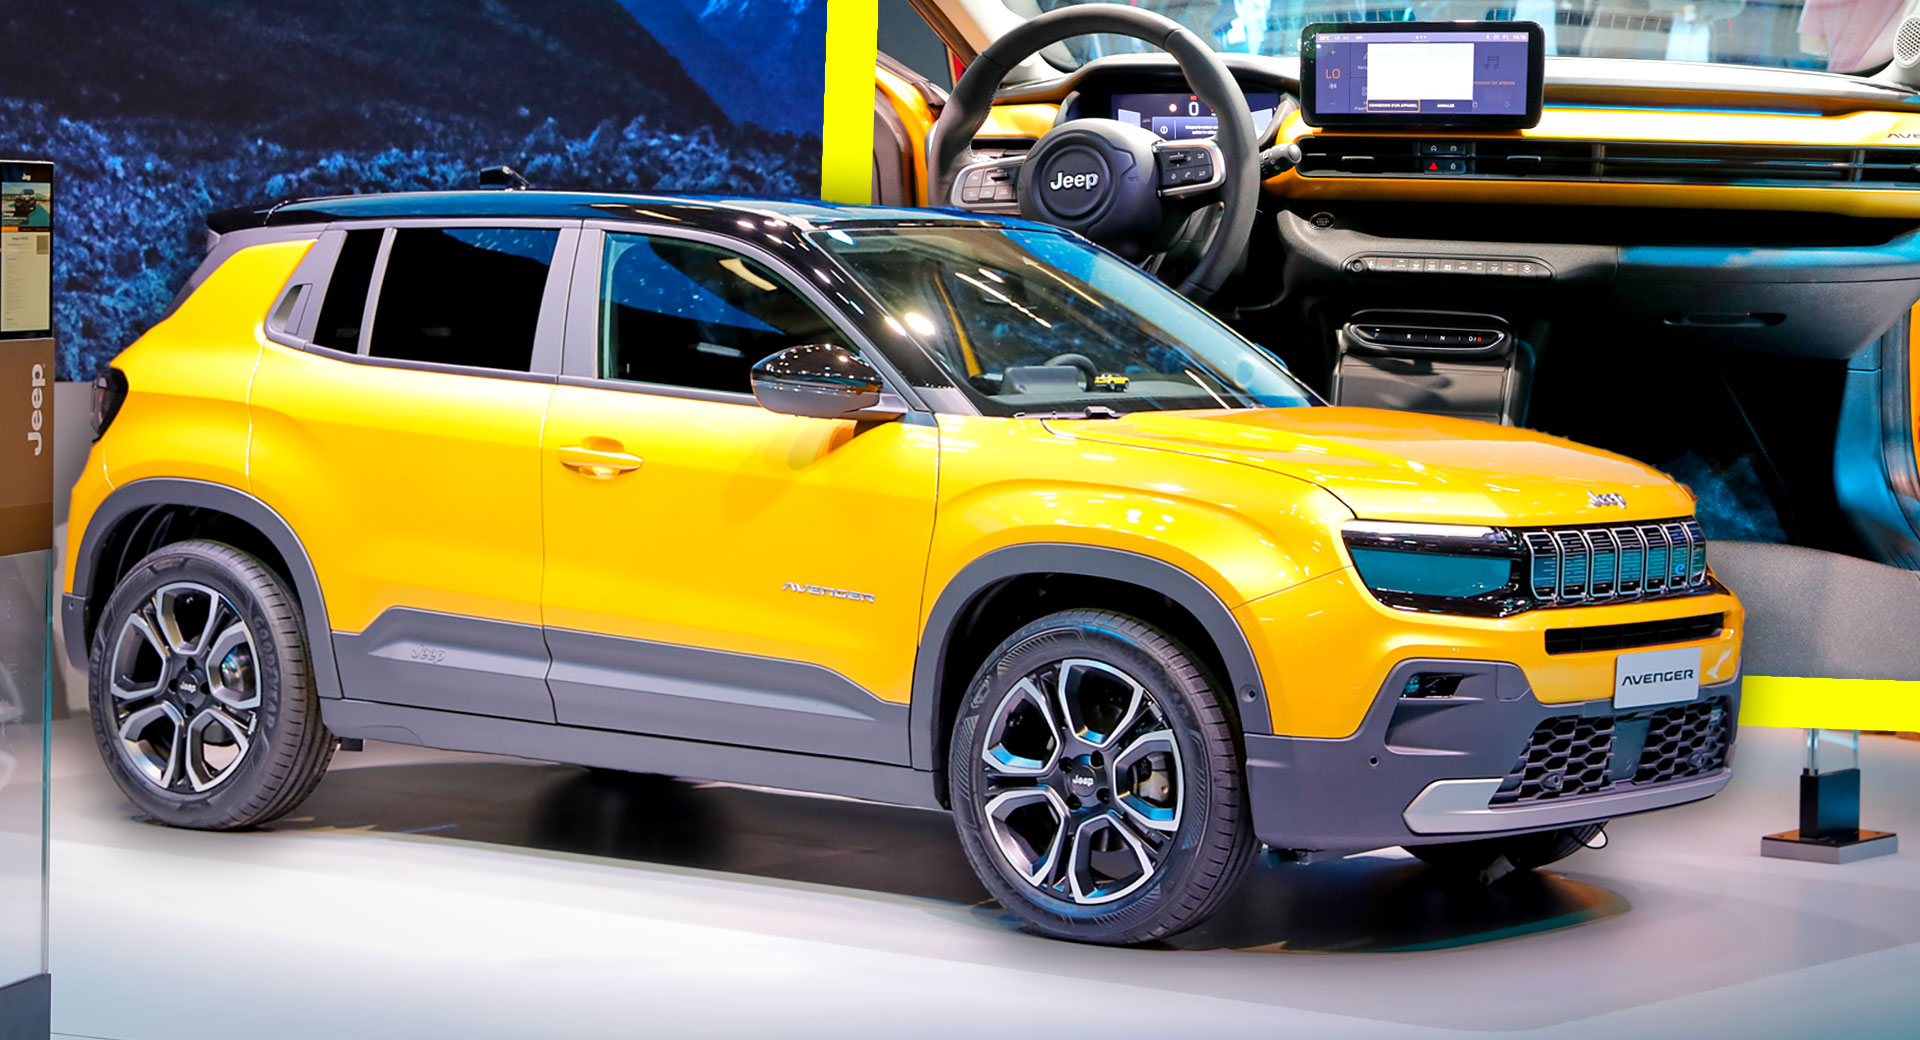 2023 Jeep Avenger Detailed As A FWD Electric SUV For Europe, ICE